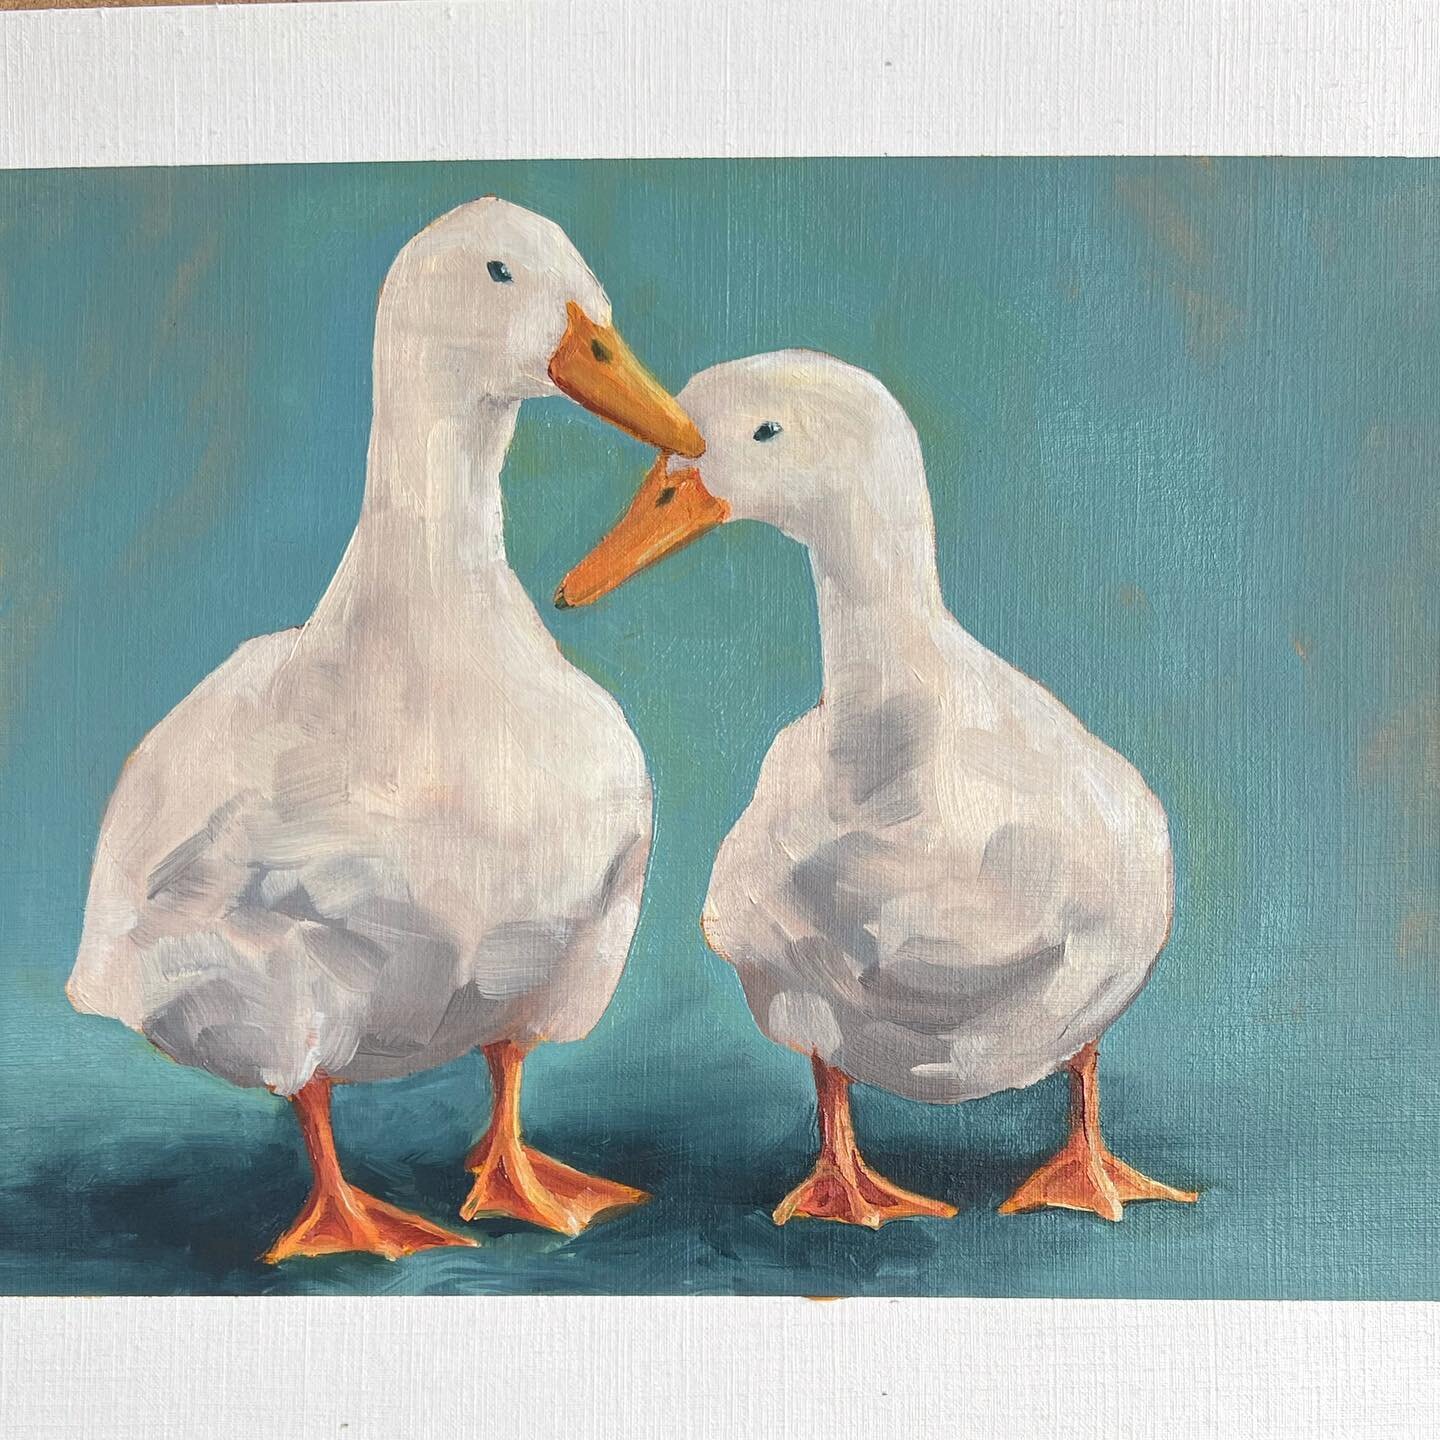 The final ducks 🦆 🦆 (there&rsquo;s a story highlight on my profile page with the process pics - thanks to everyone who followed along!).
This was an exercise in intention &mdash; in subject, composition, light and shadow, a select limited palette, 